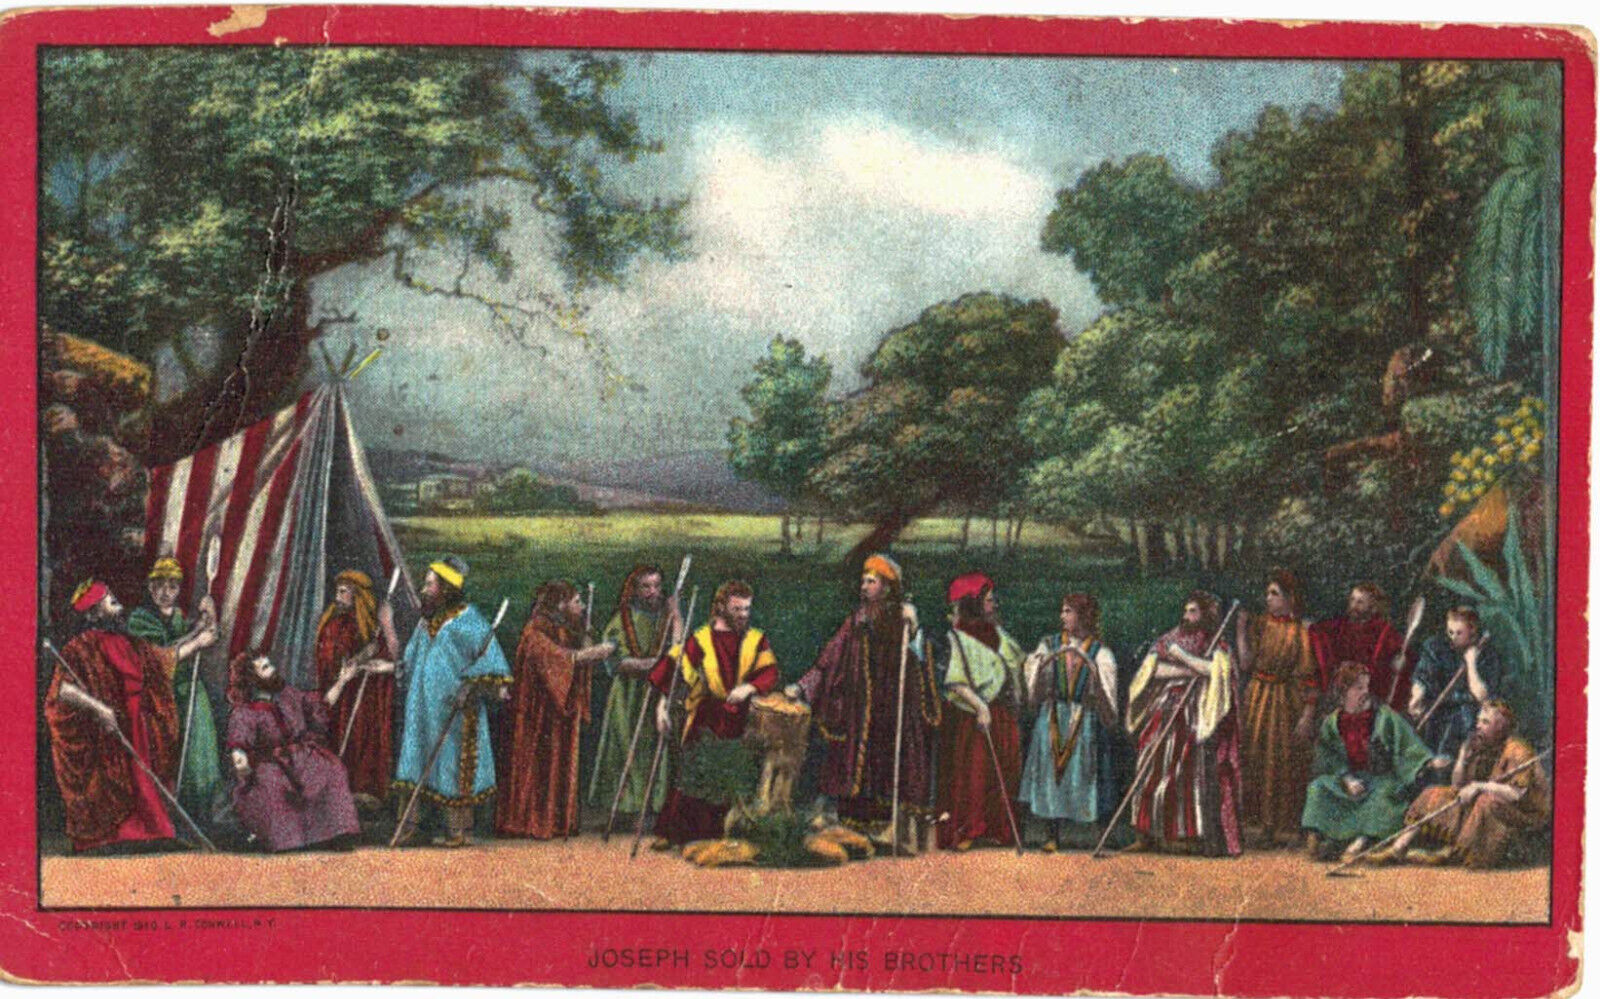 1914 Postcard The Passion Play - Joseph Sold By His Brothers